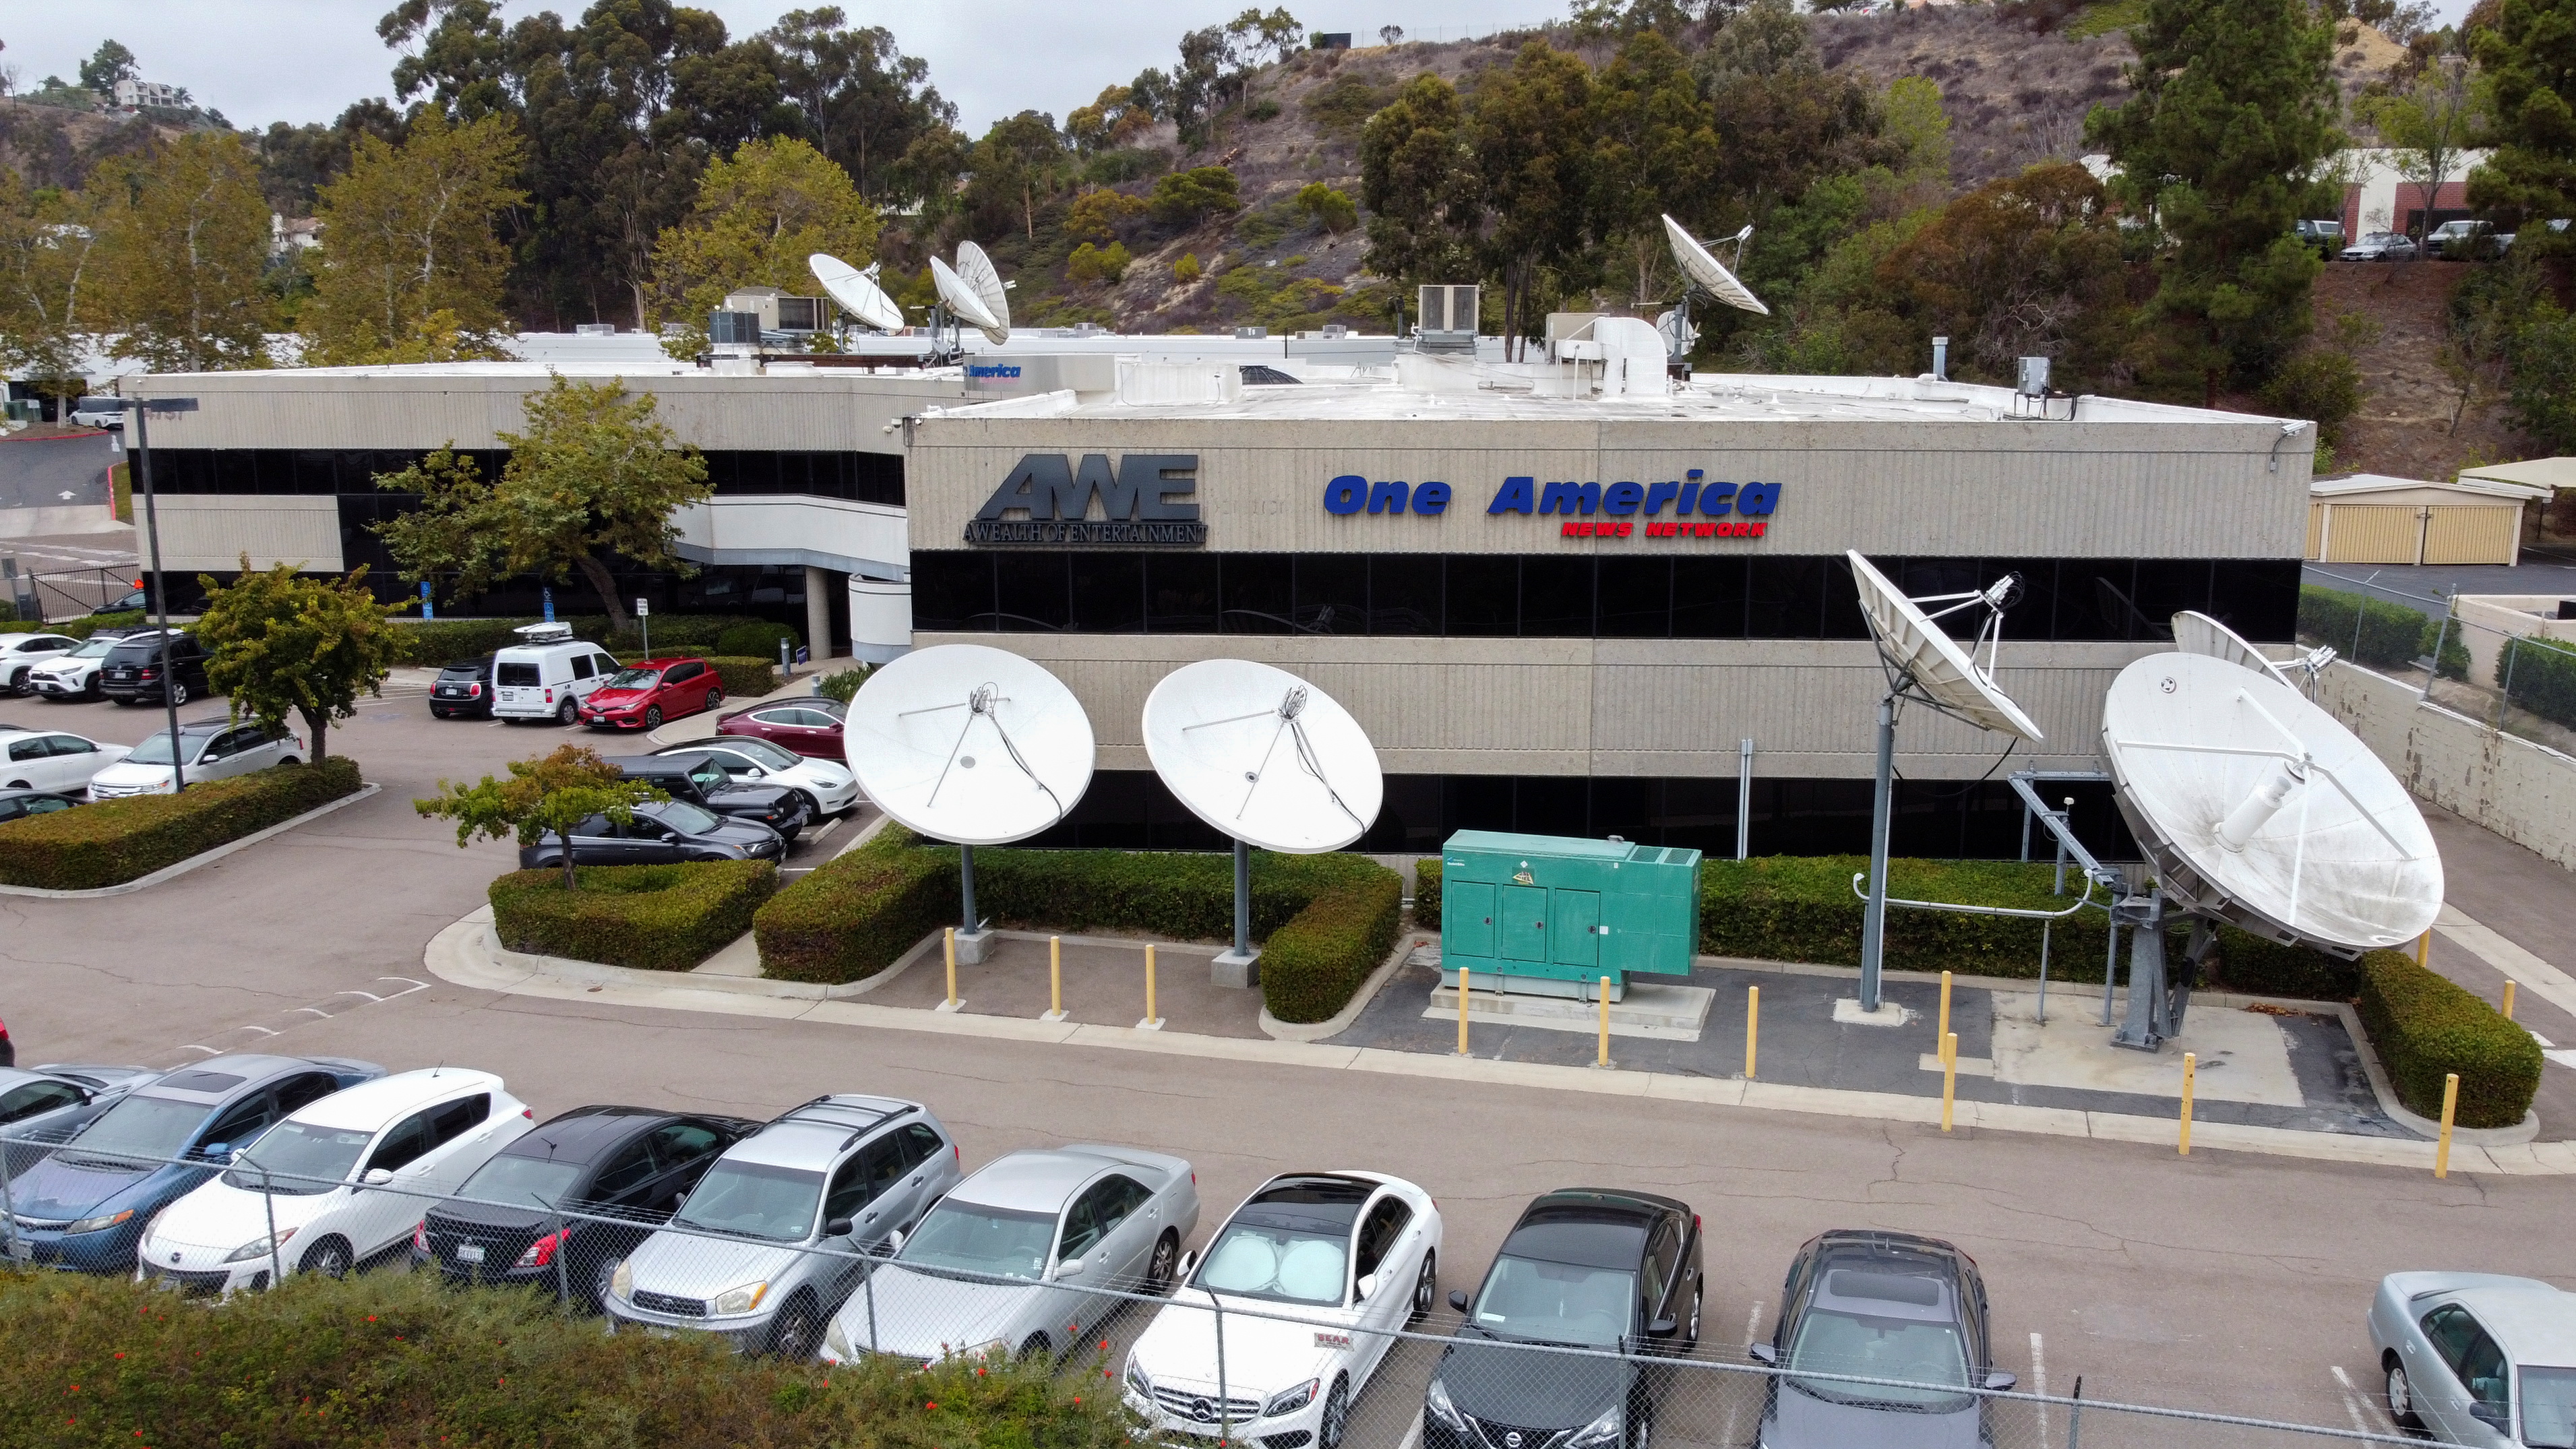 The U.S. headquarters for the One American News Network are seen in San Diego, California